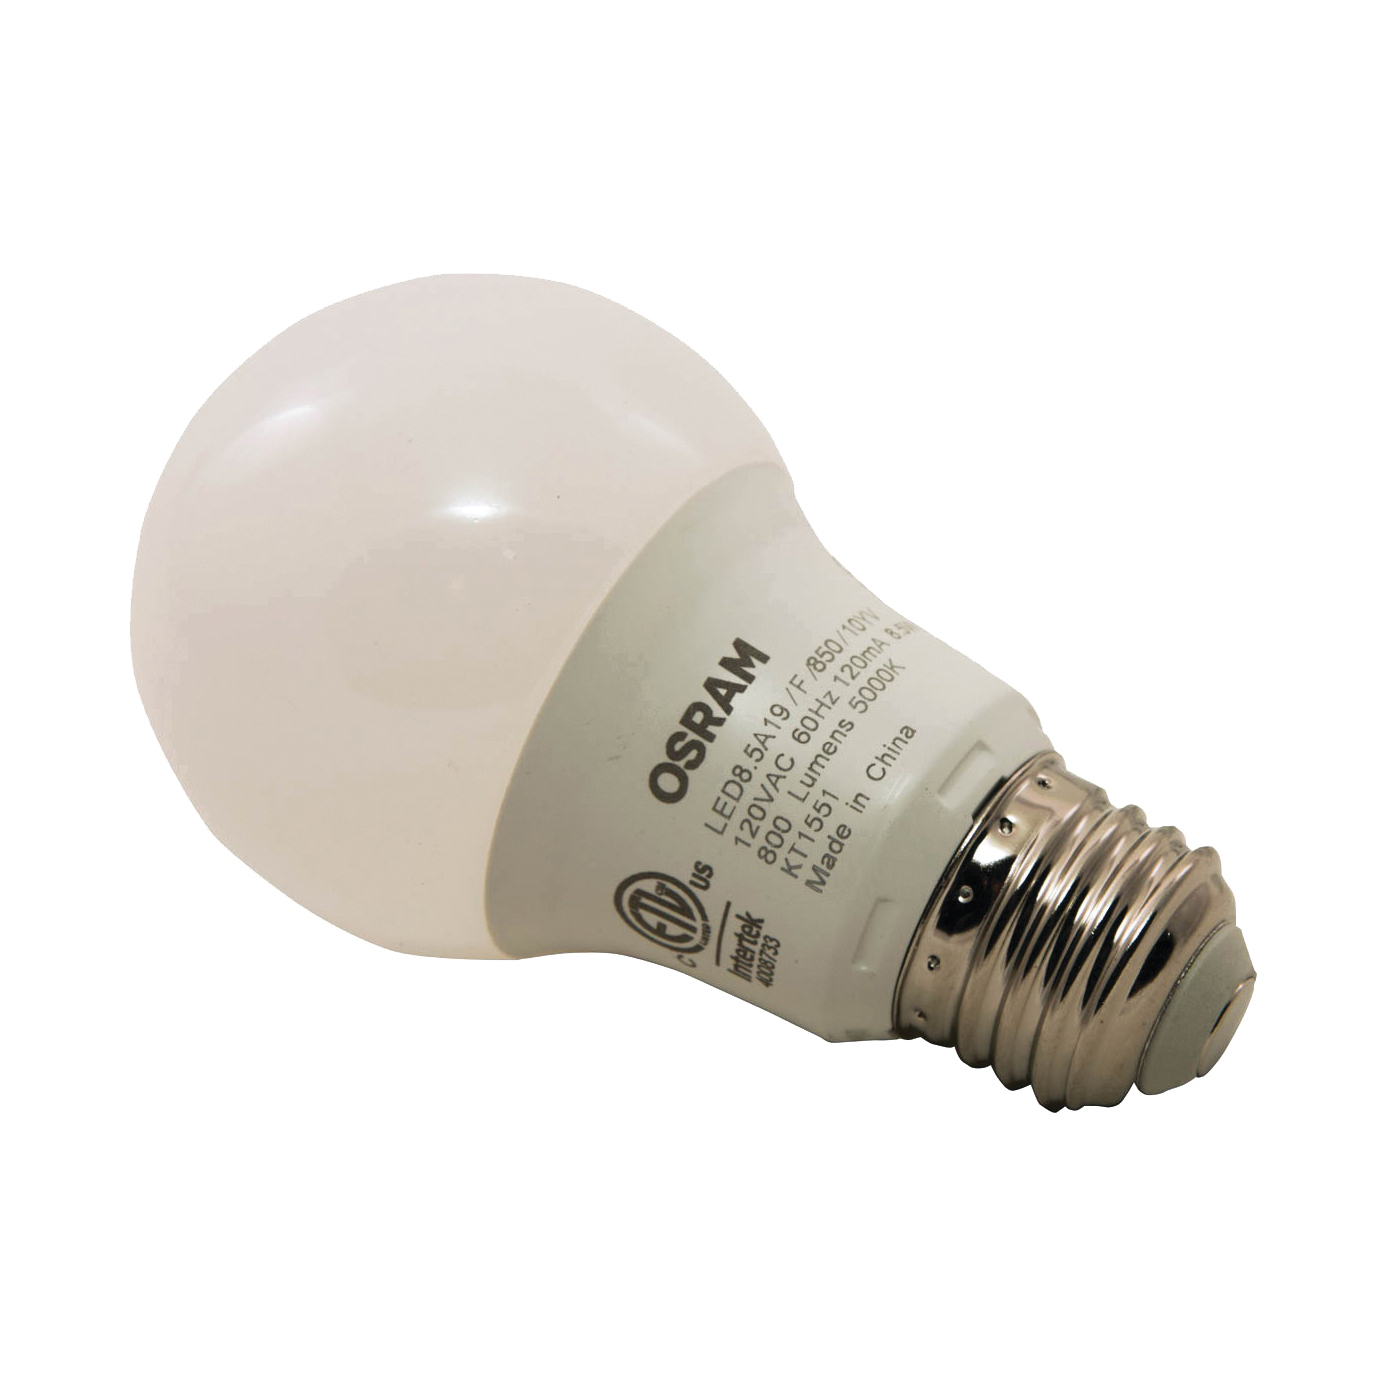 Schrijf een brief rand historisch Buy Sylvania 79282 LED Bulb, General Purpose, A19 Lamp, 60 W Equivalent,  E26 Lamp Base, Frosted, Bright White Light